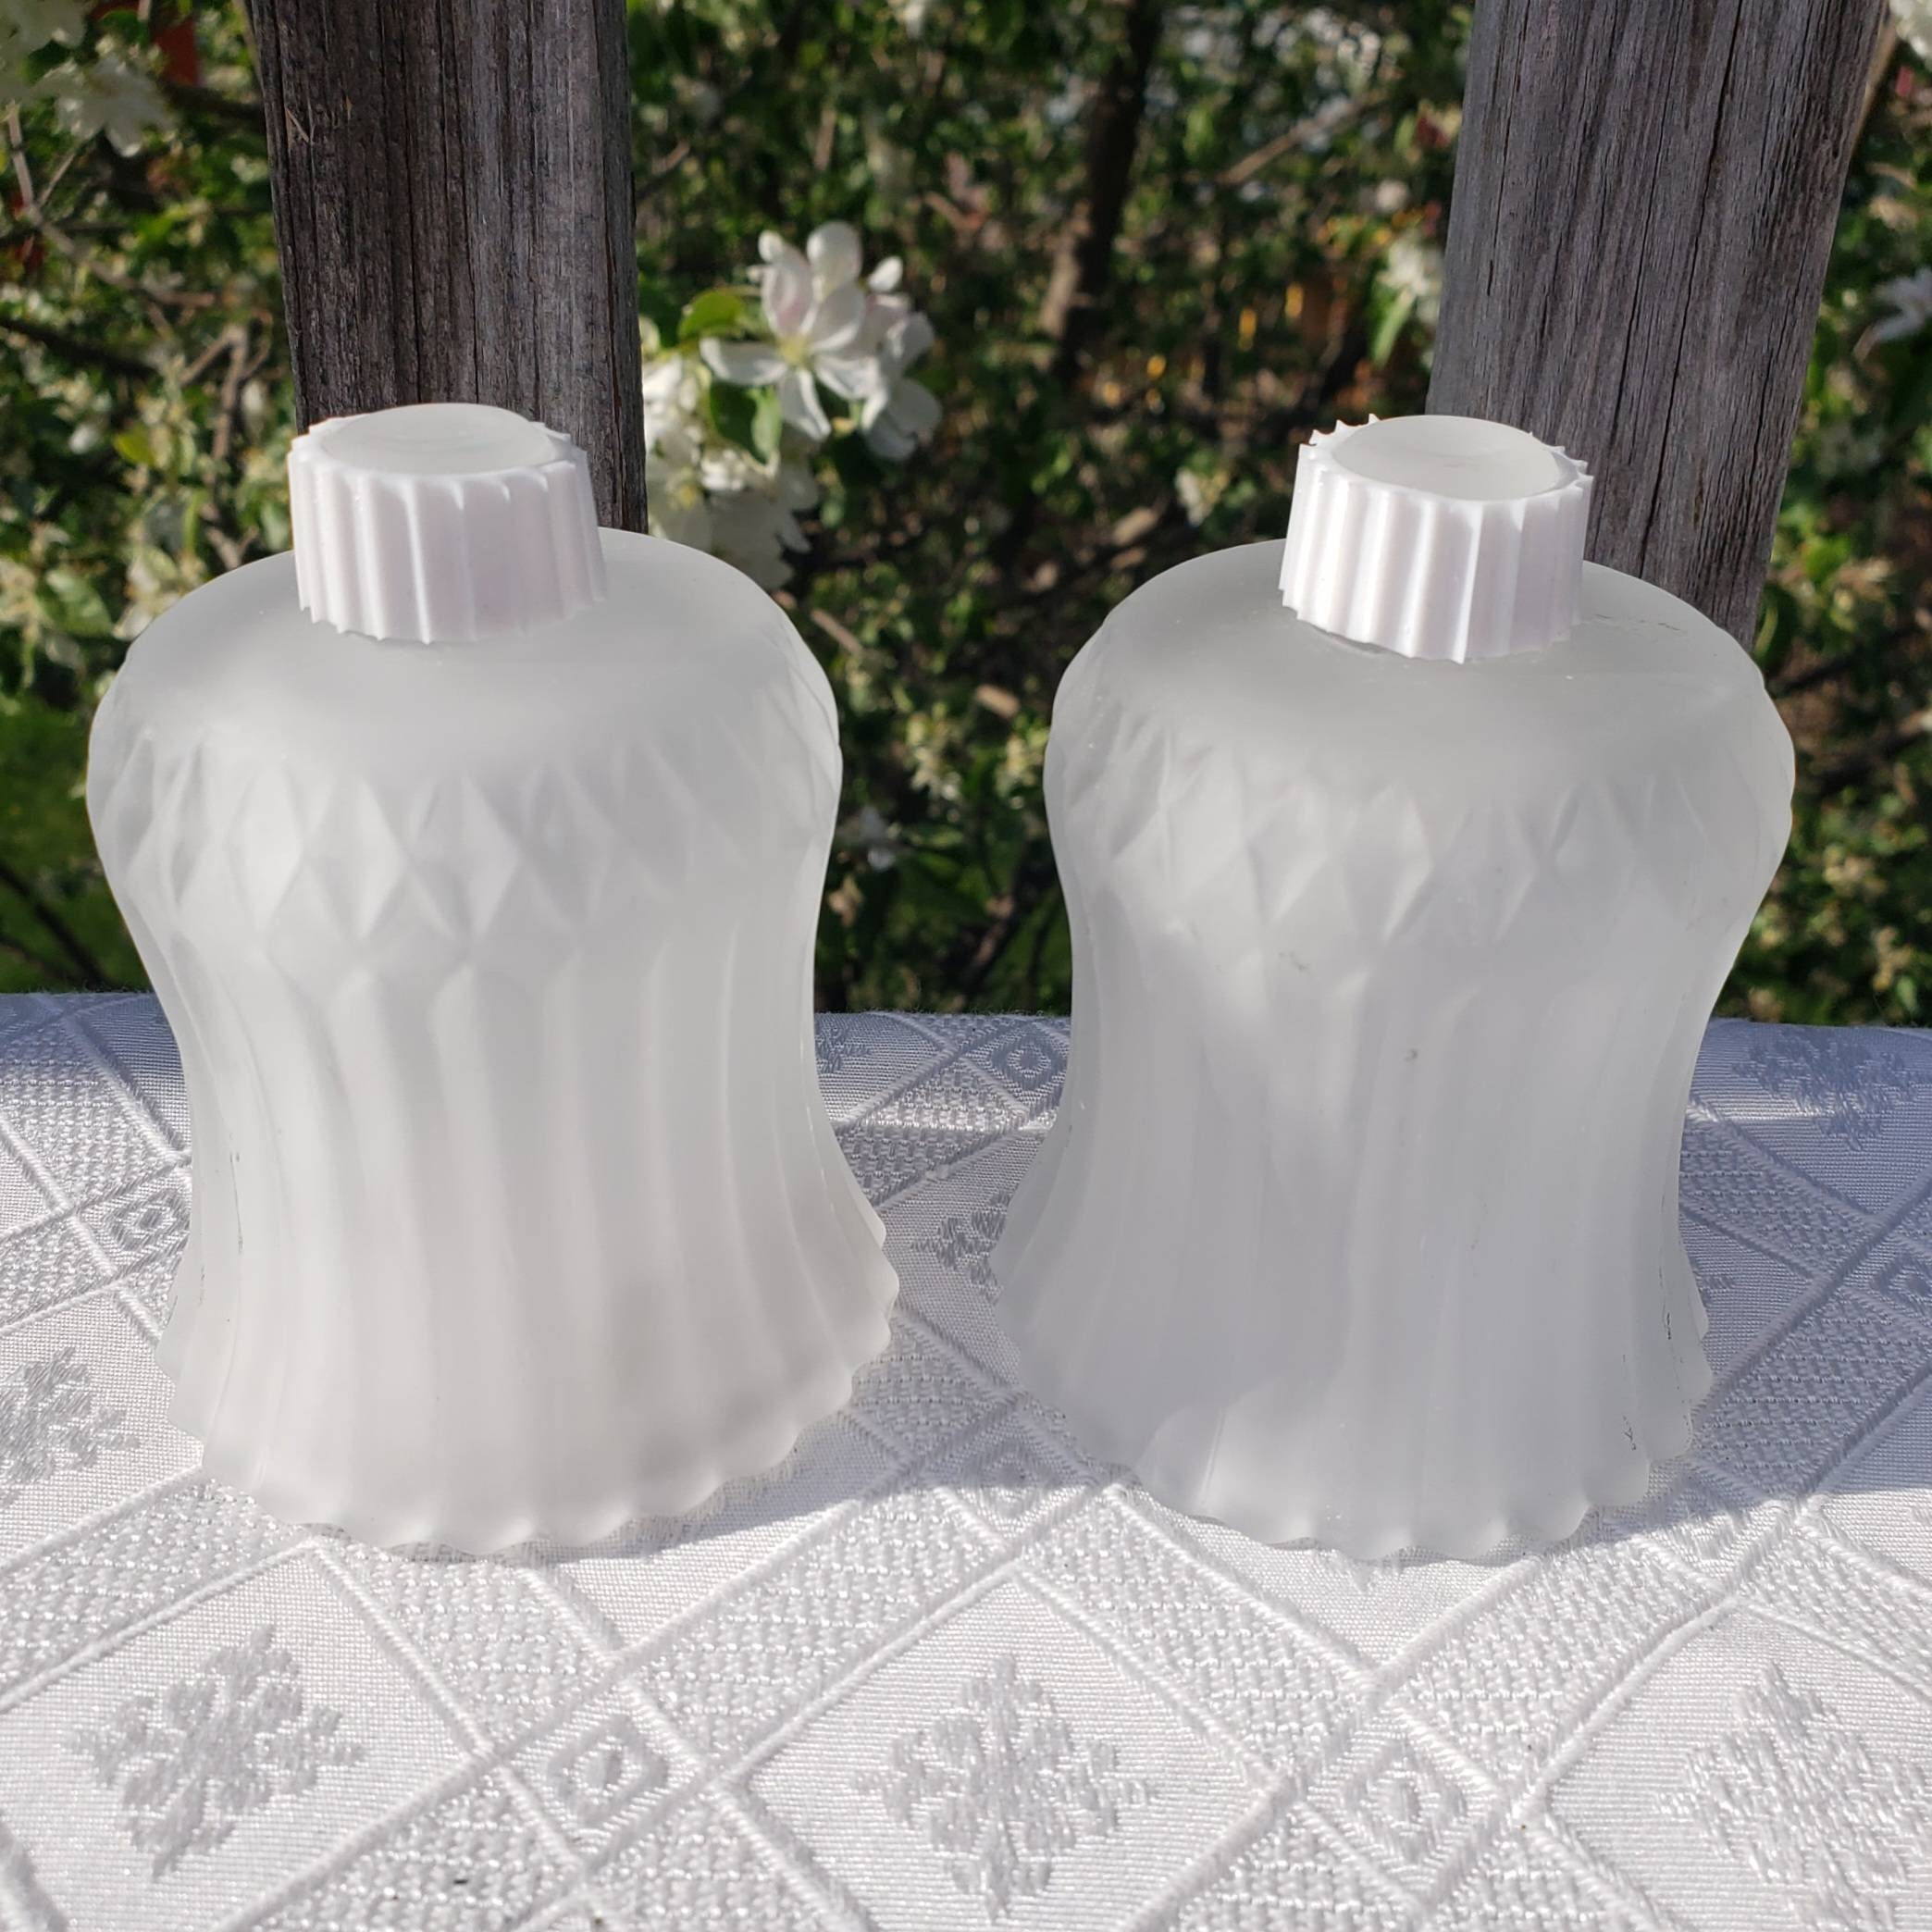 Small Short Fluted Ribbed for Sconces Glass Candle Holders with Pegs Wall Decor Set of 2 Votive Cups